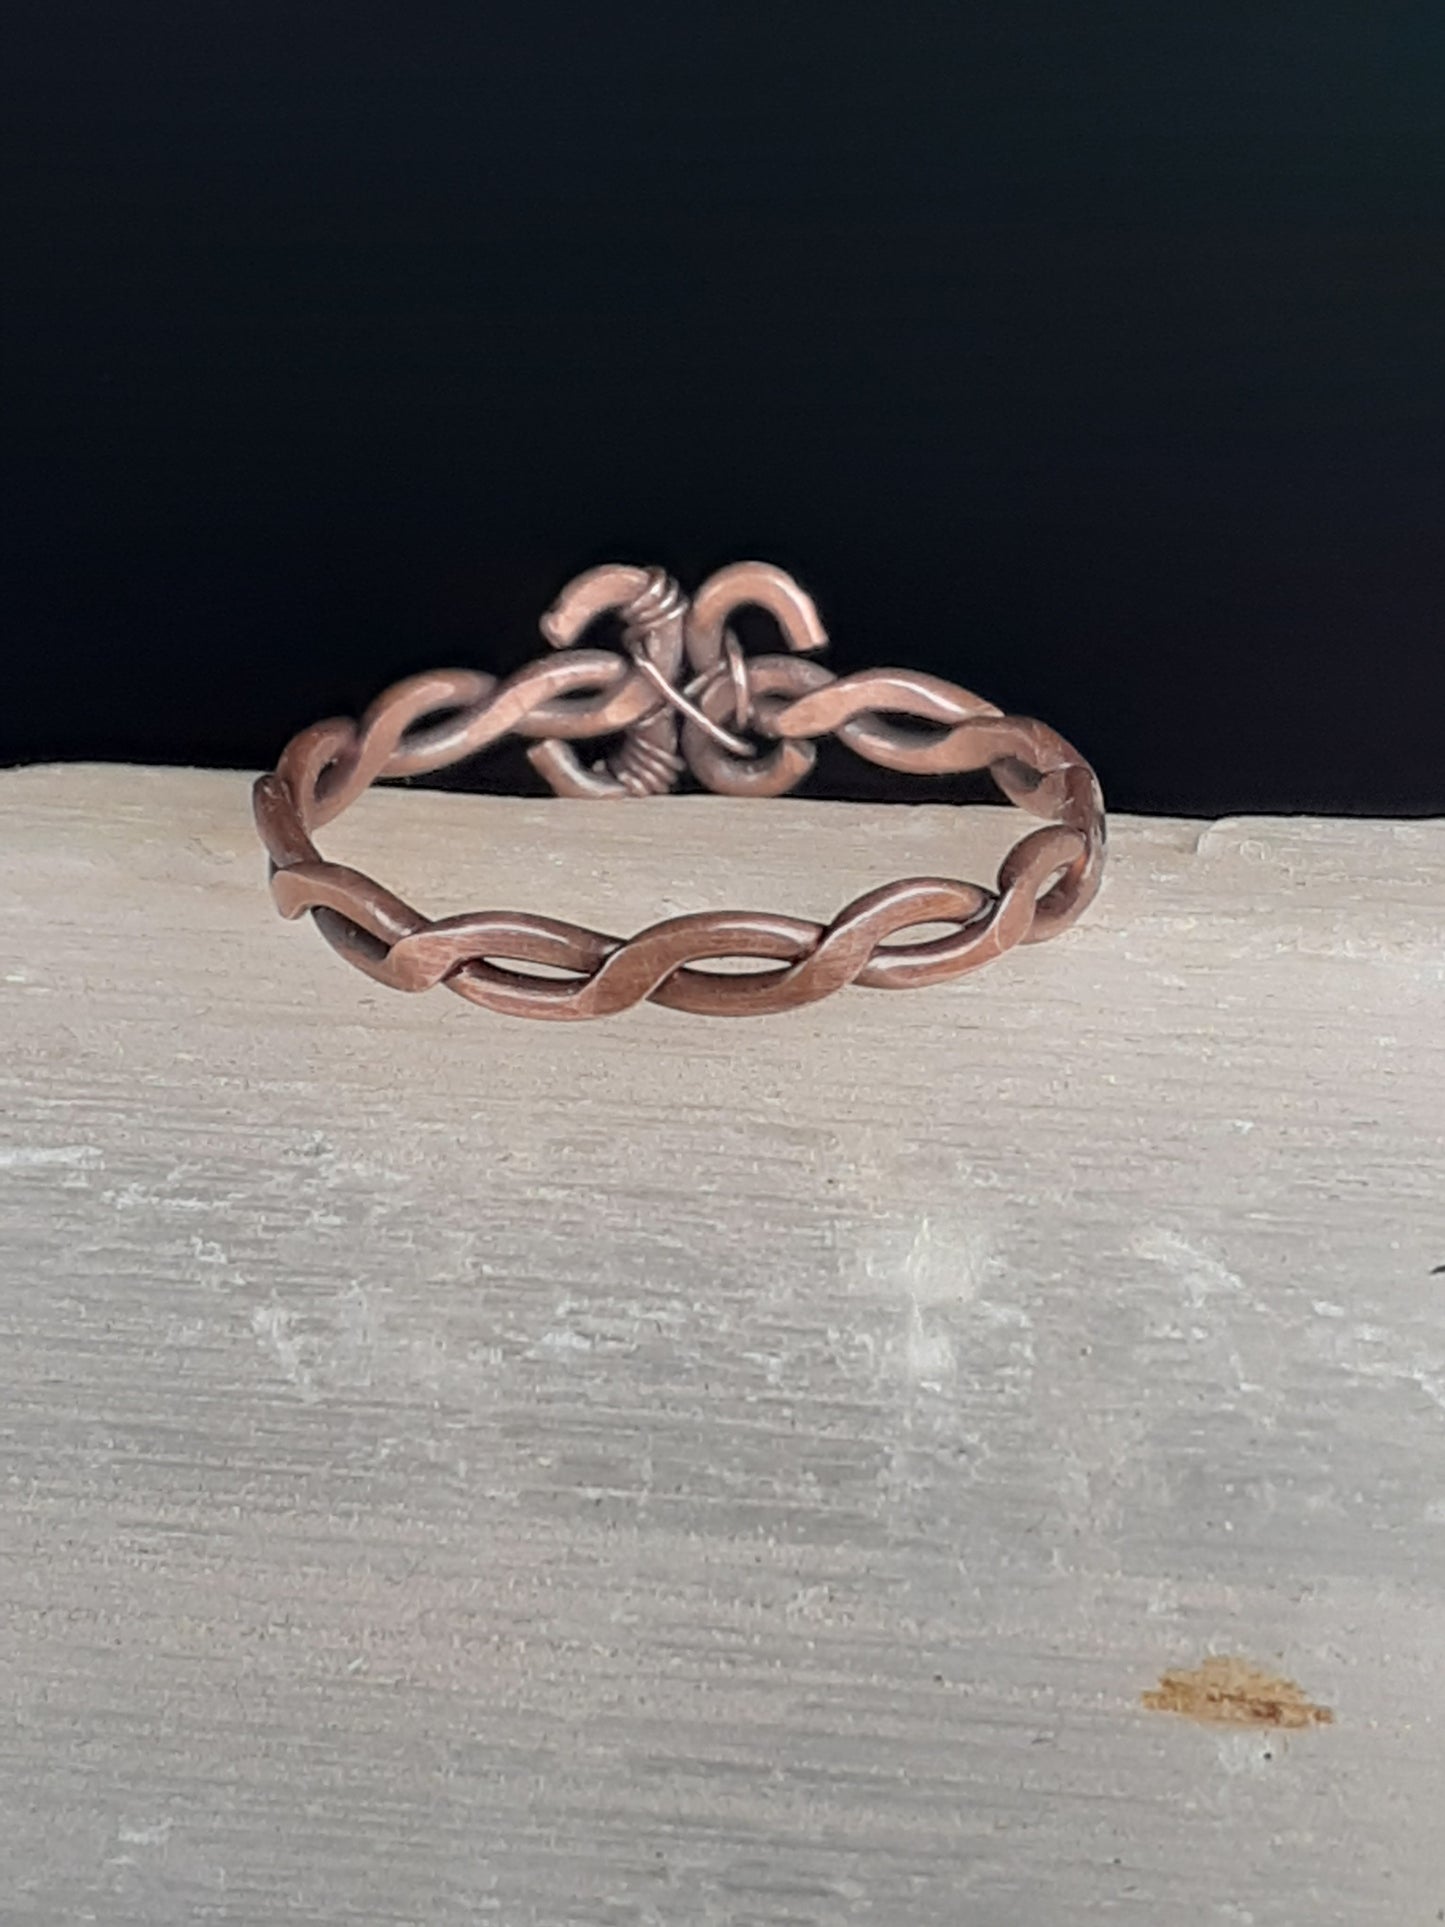 Hammered Copper Stackable Ring Artist: Lindsey Griffin  Hammered oxidized and polished copper wire  Woven wire  Size 7.5  Comes with a polishing cloth and care instructions  Please note items are hand made and there will be variations between each piece Making a stackable ring